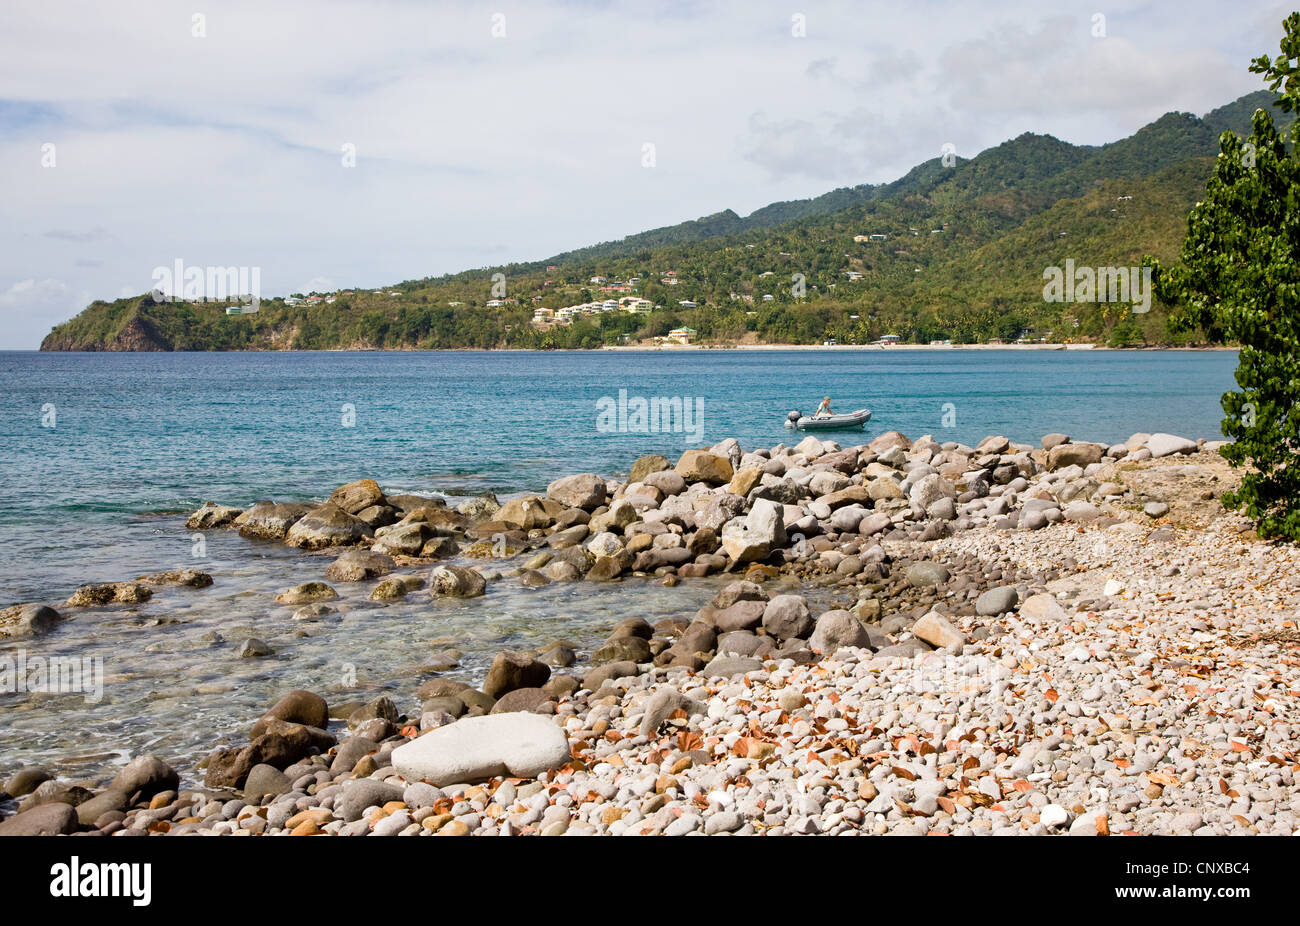 Small beach on the Cabrits National Park peninsula in Douglas Bay in the north west of Dominica Stock Photo